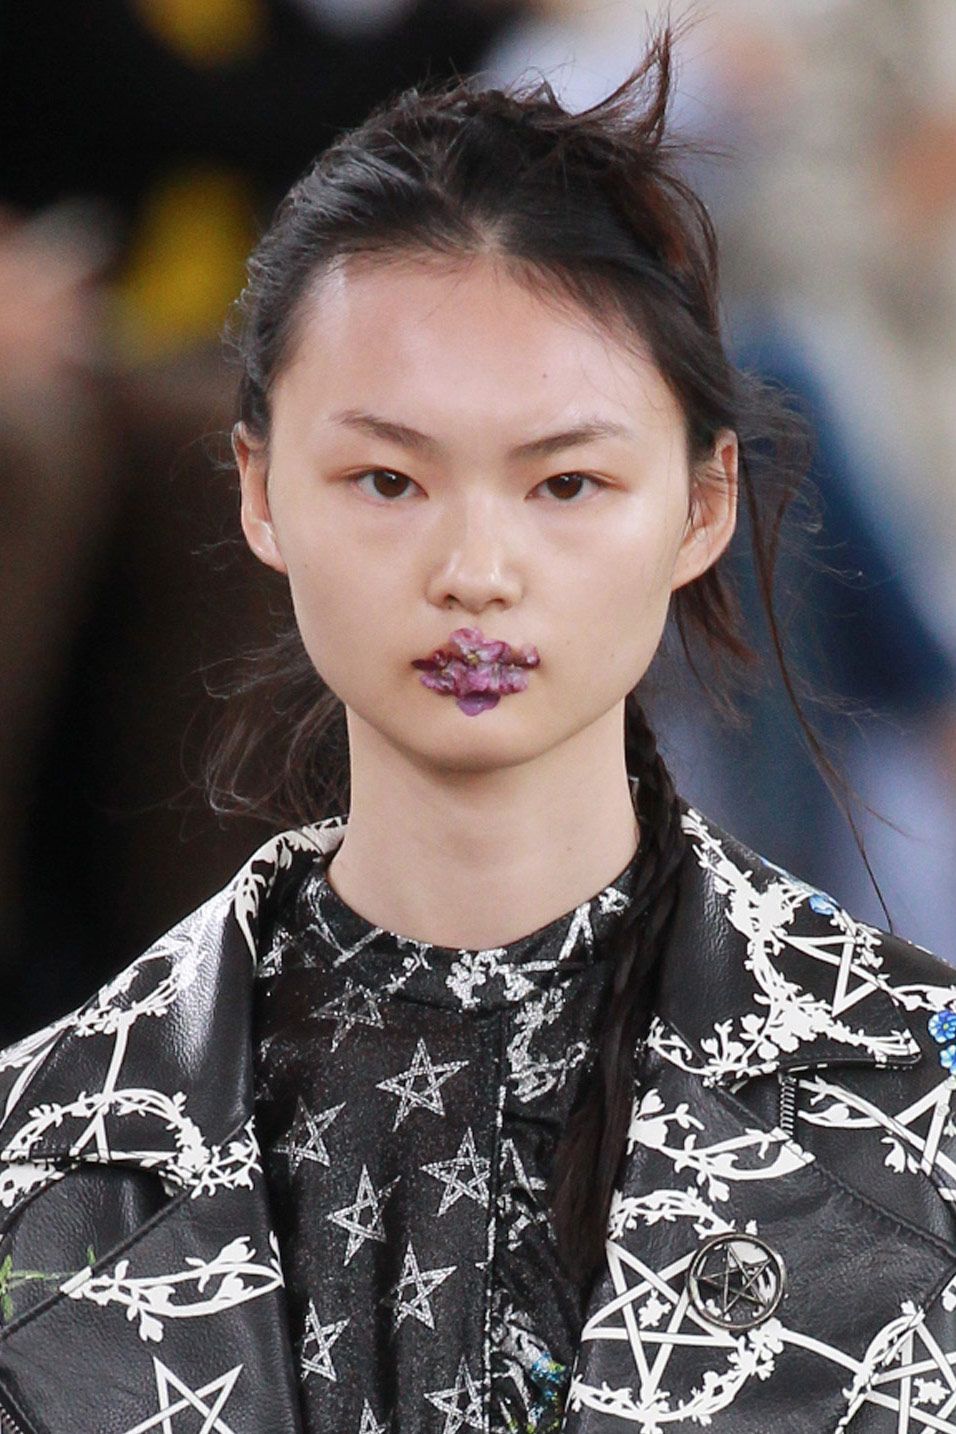 Preen's Spring 2017 Models Had Flowers for Lipstick